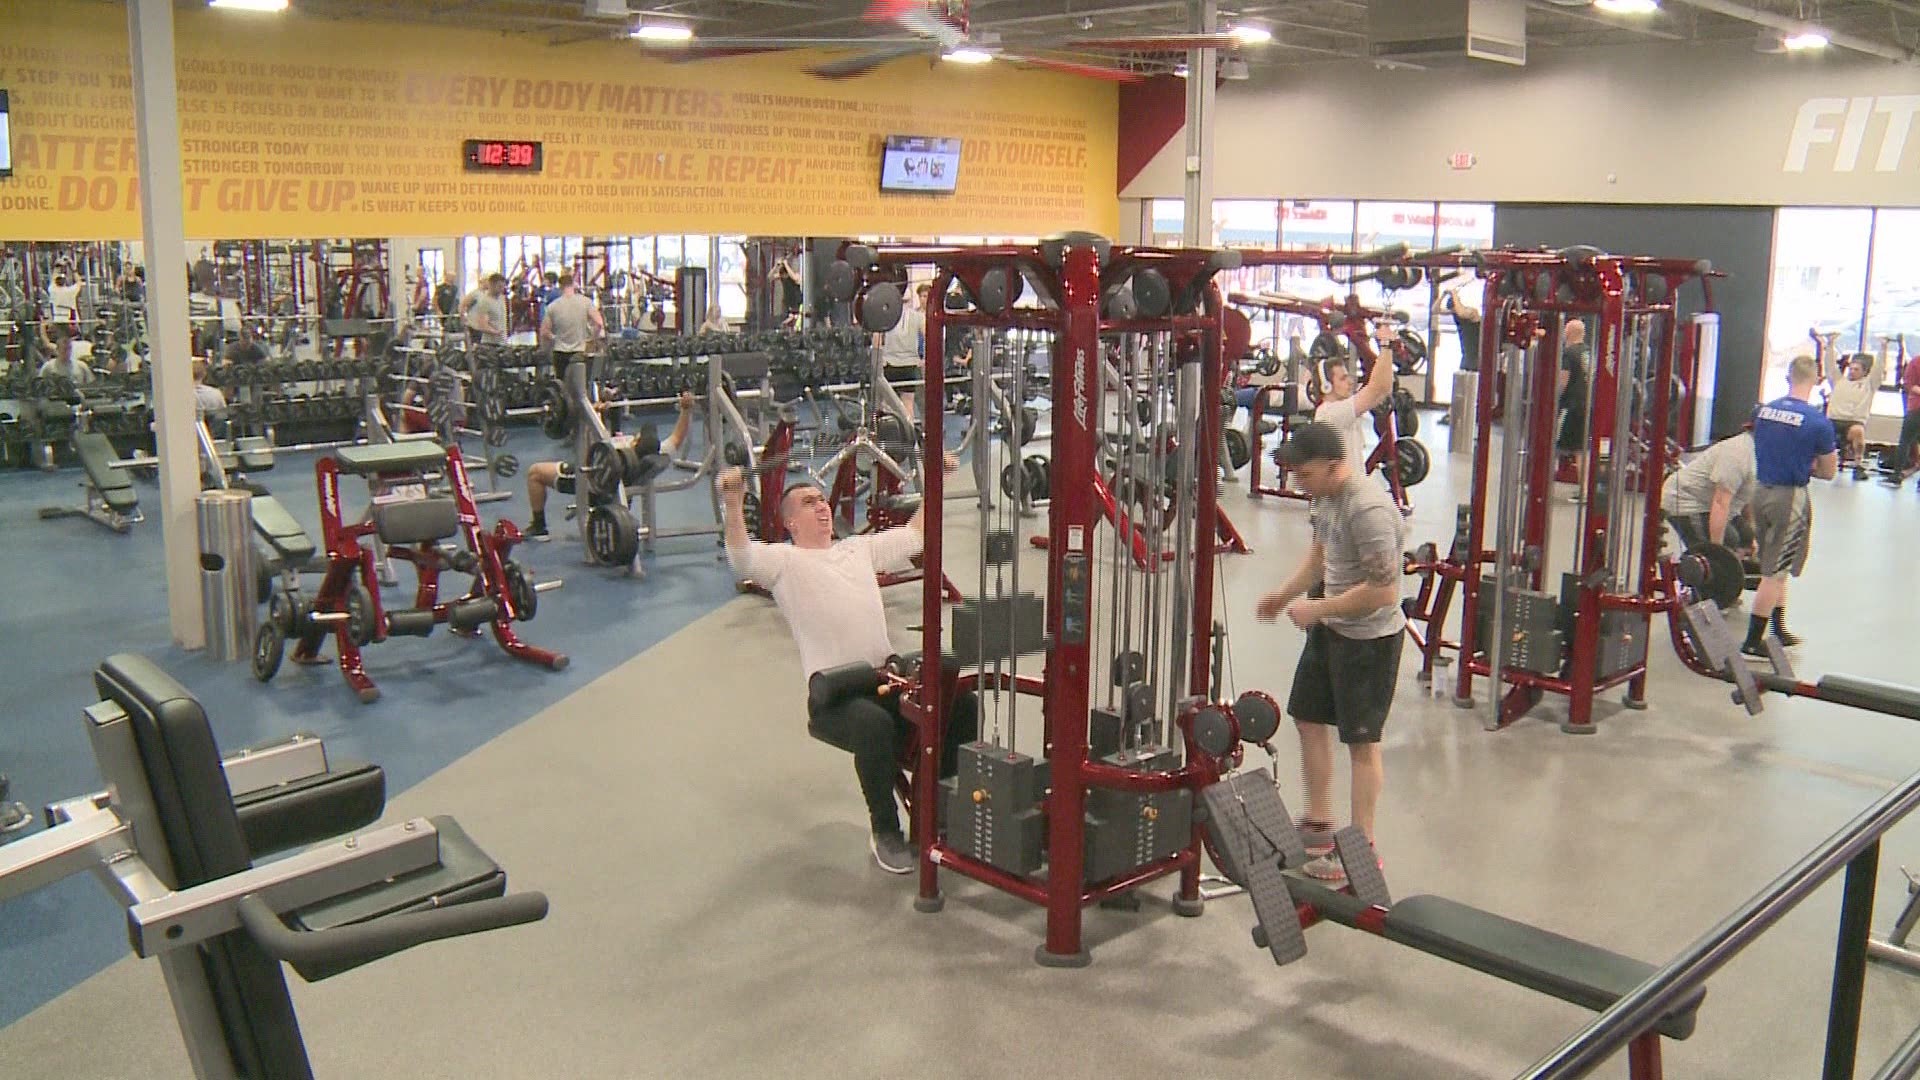 The Club Fitness Lemay Location Receives A Face Lift Ksdk Com